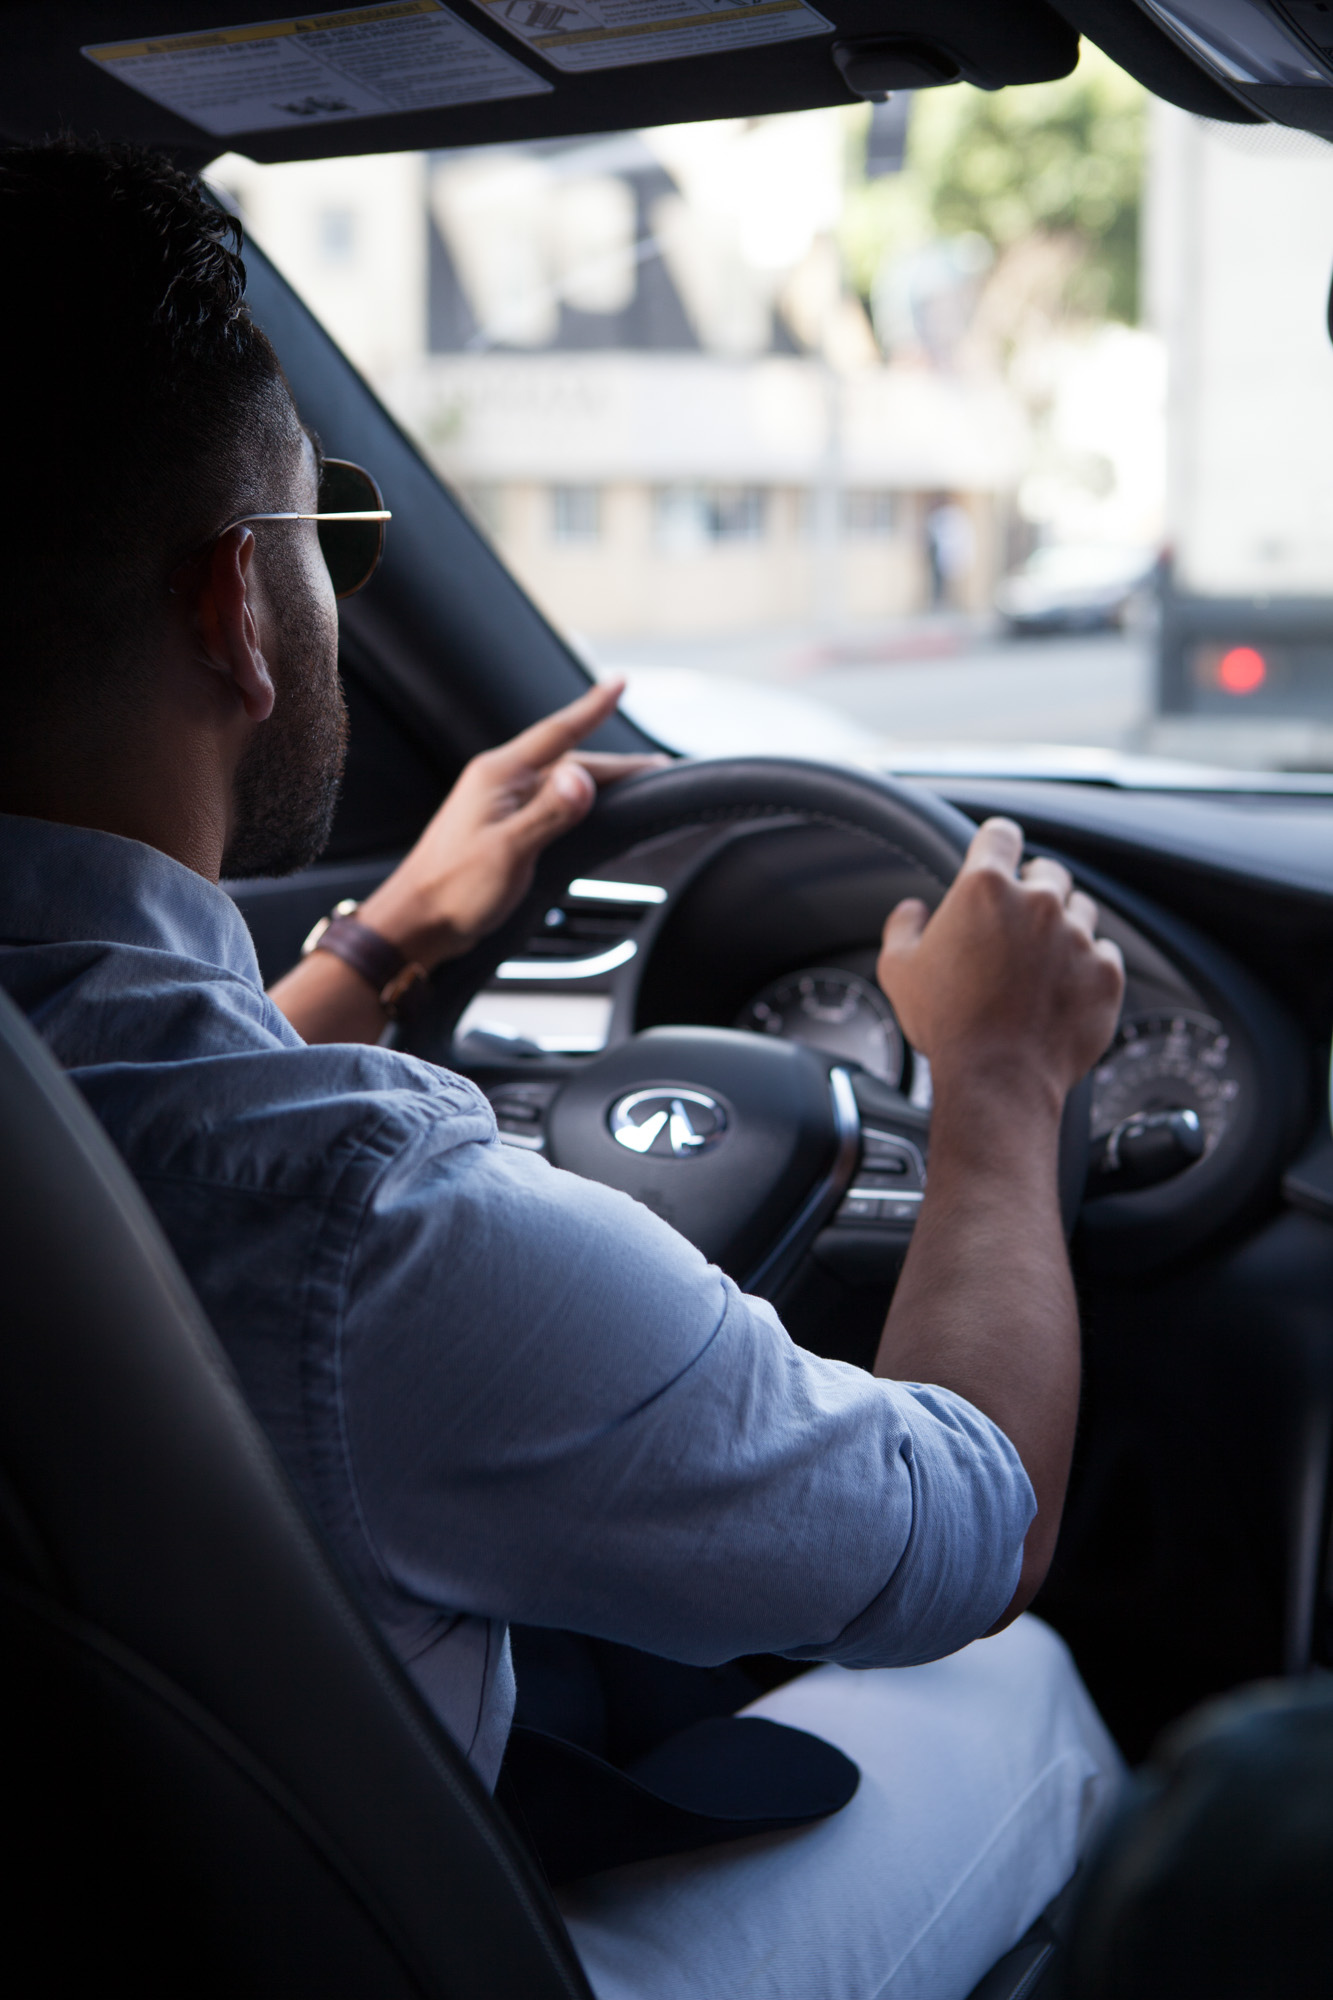 J Fig - @rule_of_thumbs driving Infiniti QX-50 | Car Photography | Commercial Photography shot in Los Angeles, California for Crispin Porter + Bogusky